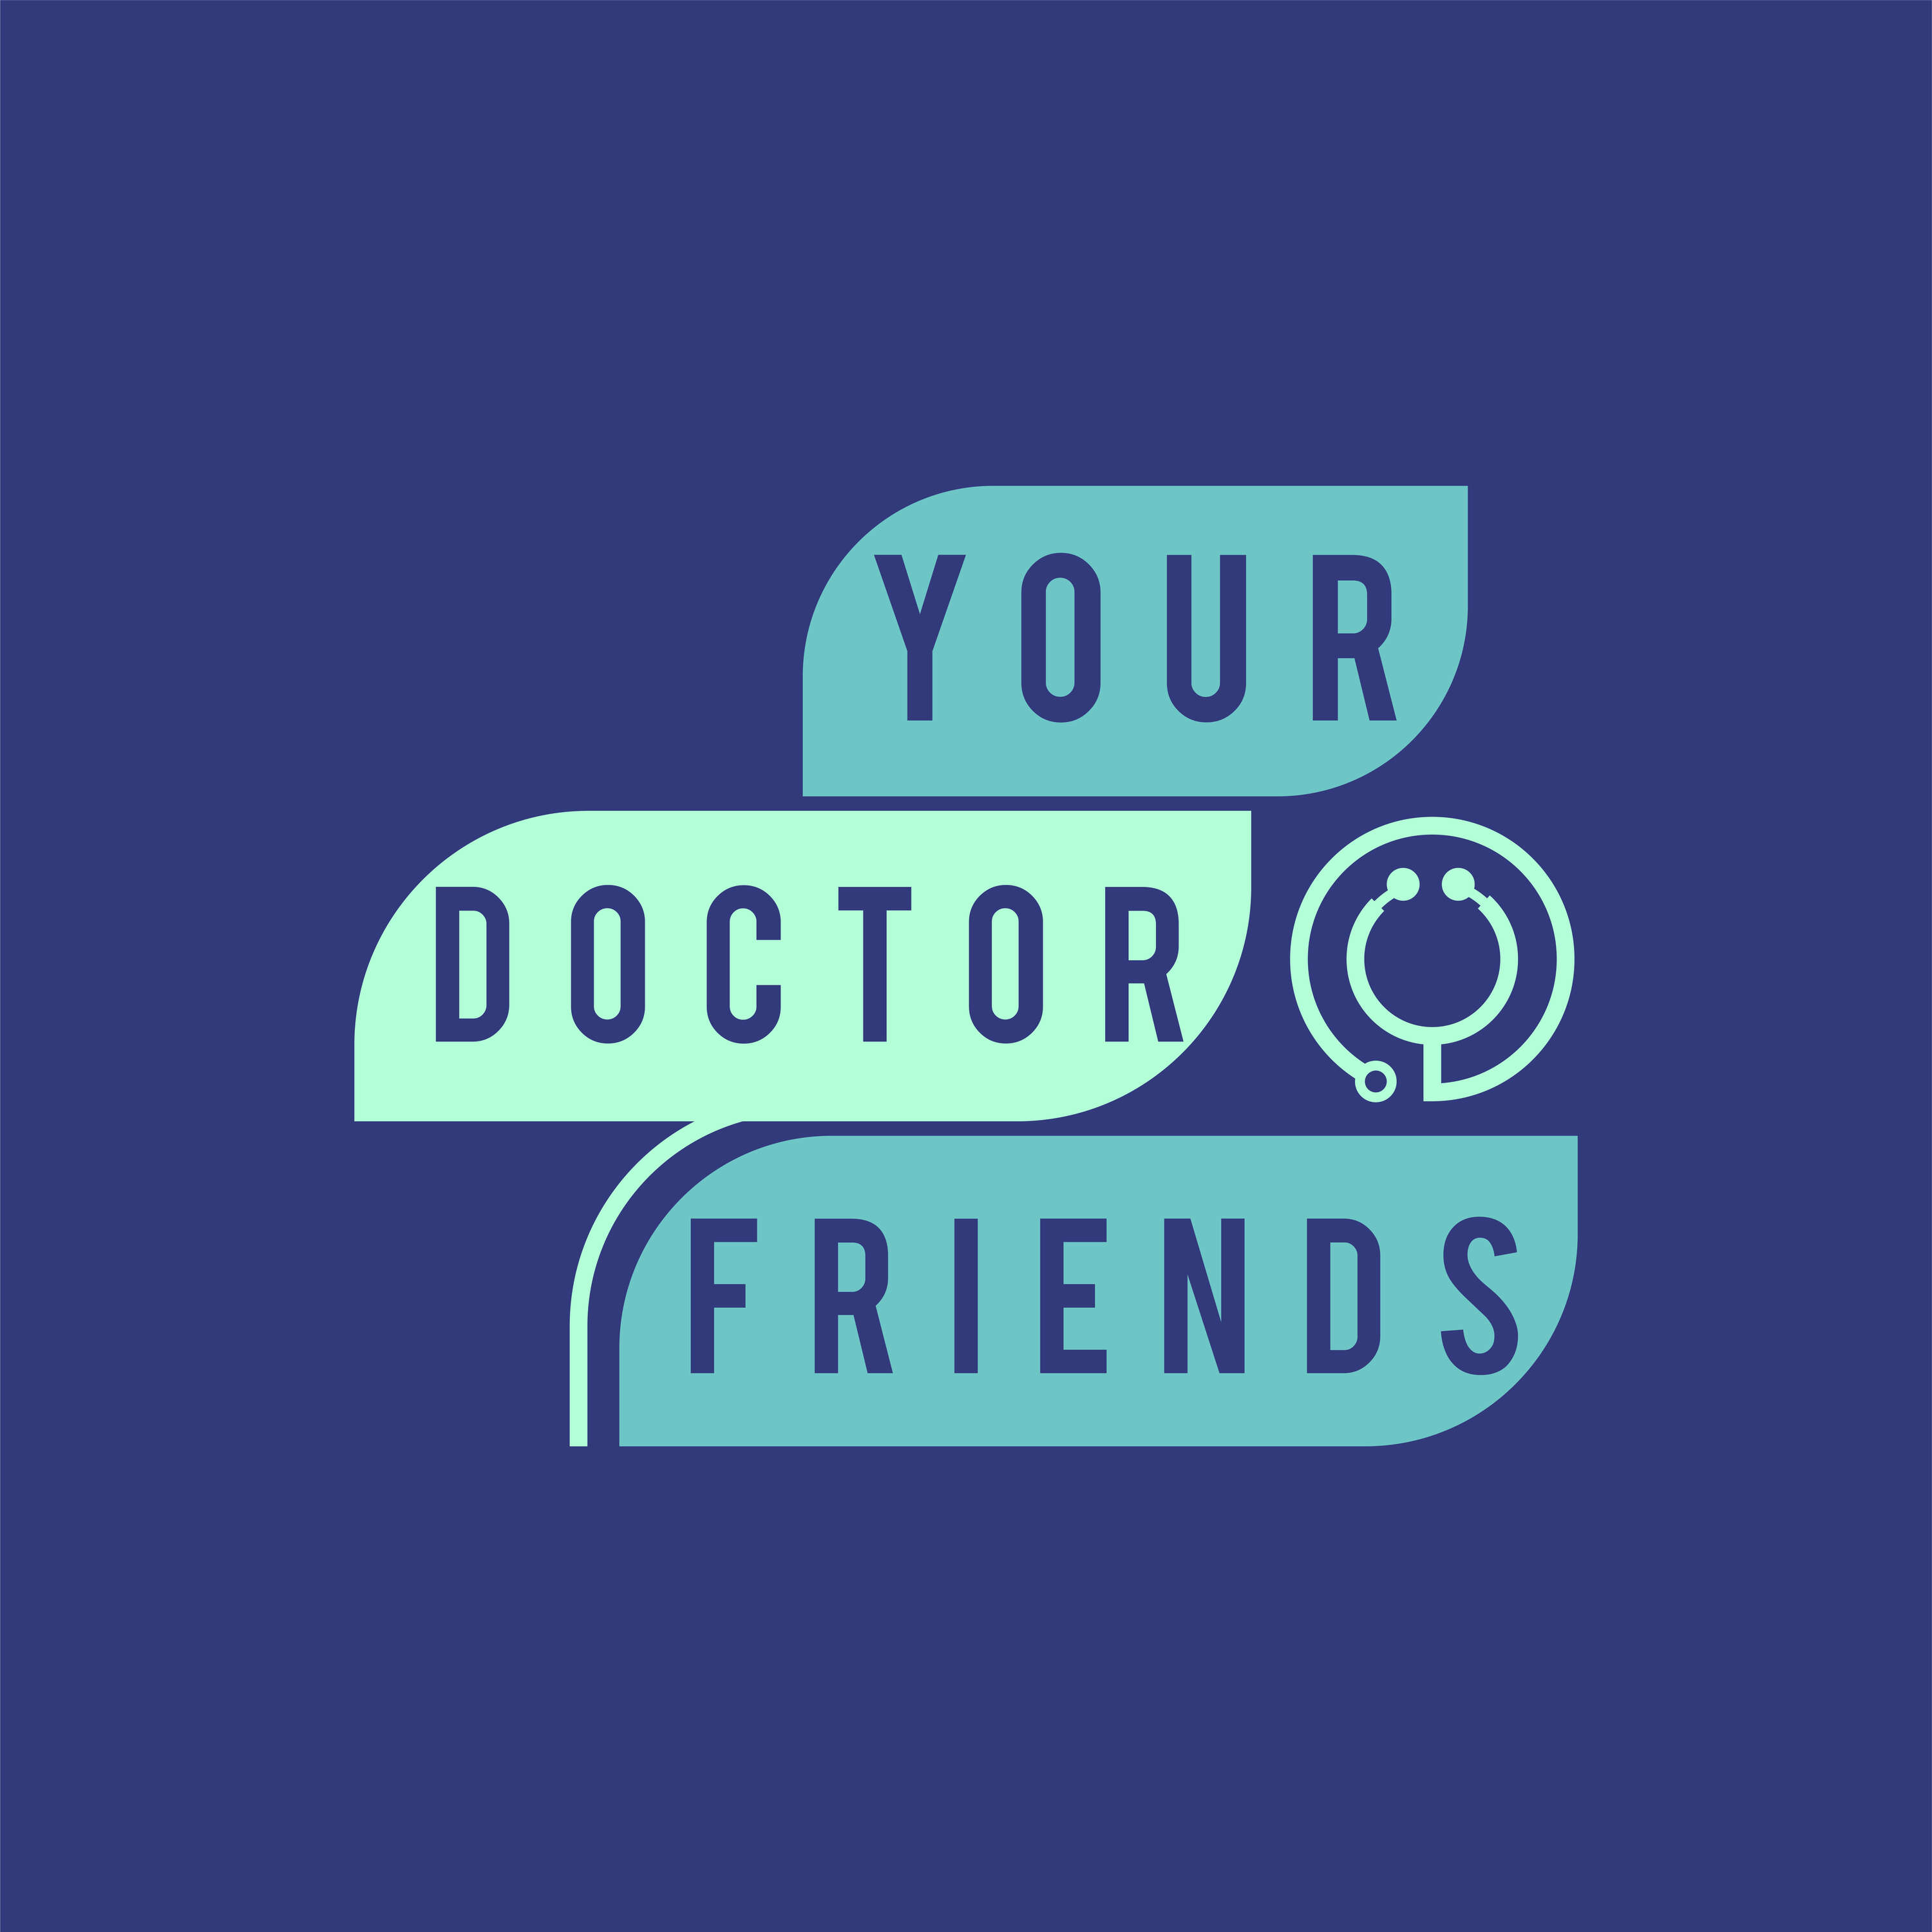 We are Your Doctor Friends! (TRAILER 2.0)